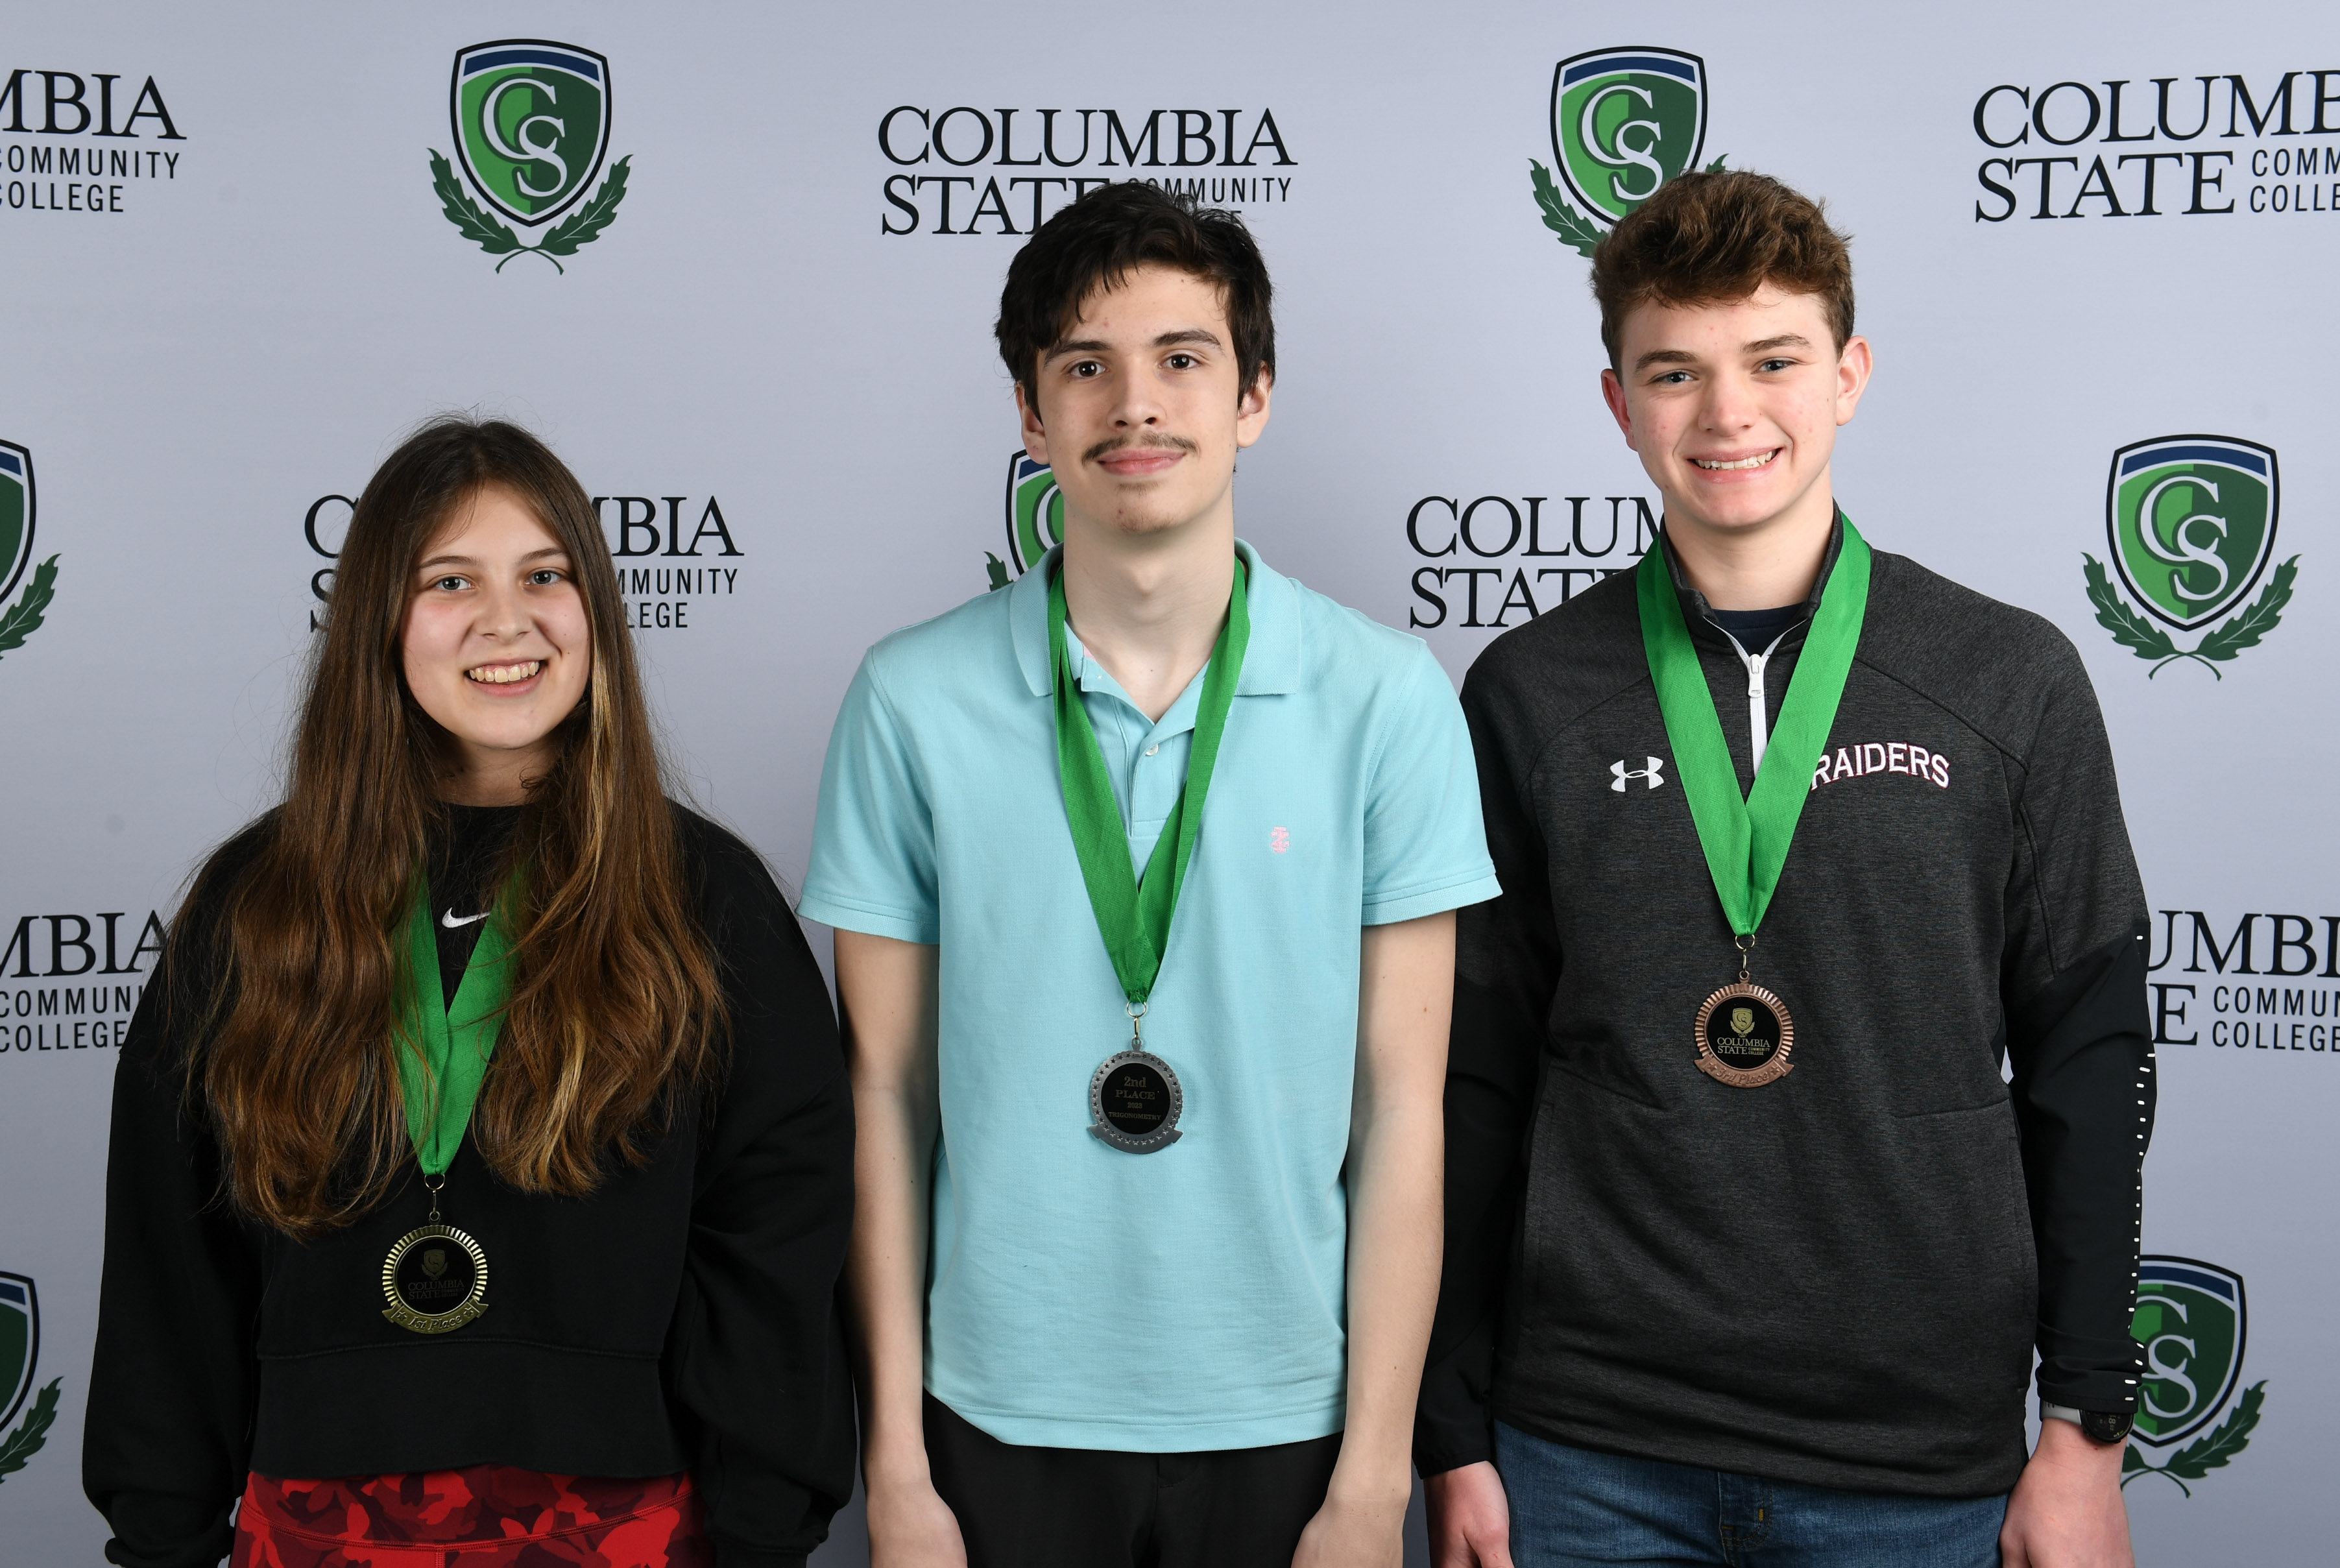 Trigonometry Winners (left to right): First place winner, Kennedy Fry of Summit High School; second place winner, Judah Greer of Spring Hill High School; and third place winner, Wesley Jones of Spring Hill High School.